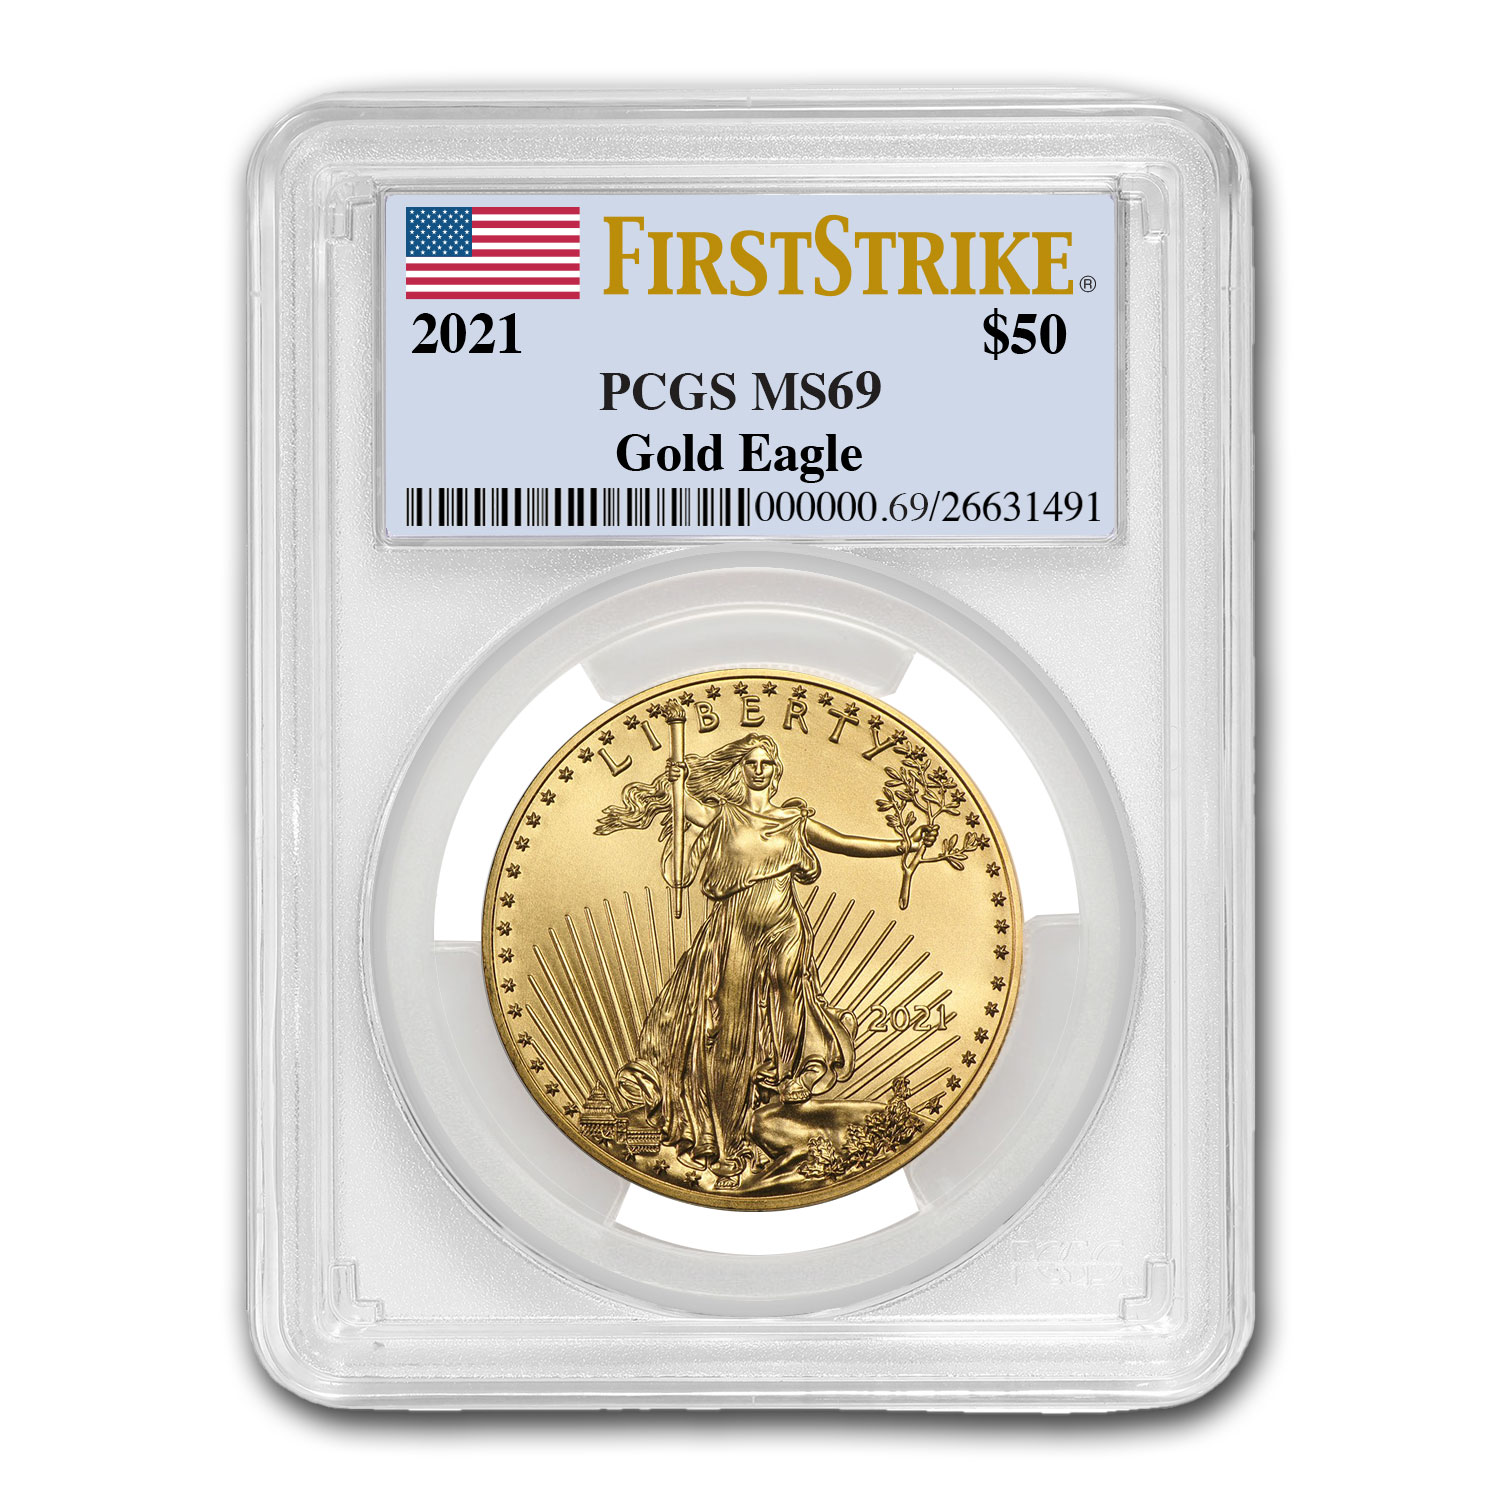 Buy 2021 1 oz American Gold Eagle MS-69 PCGS (FirstStrike?)